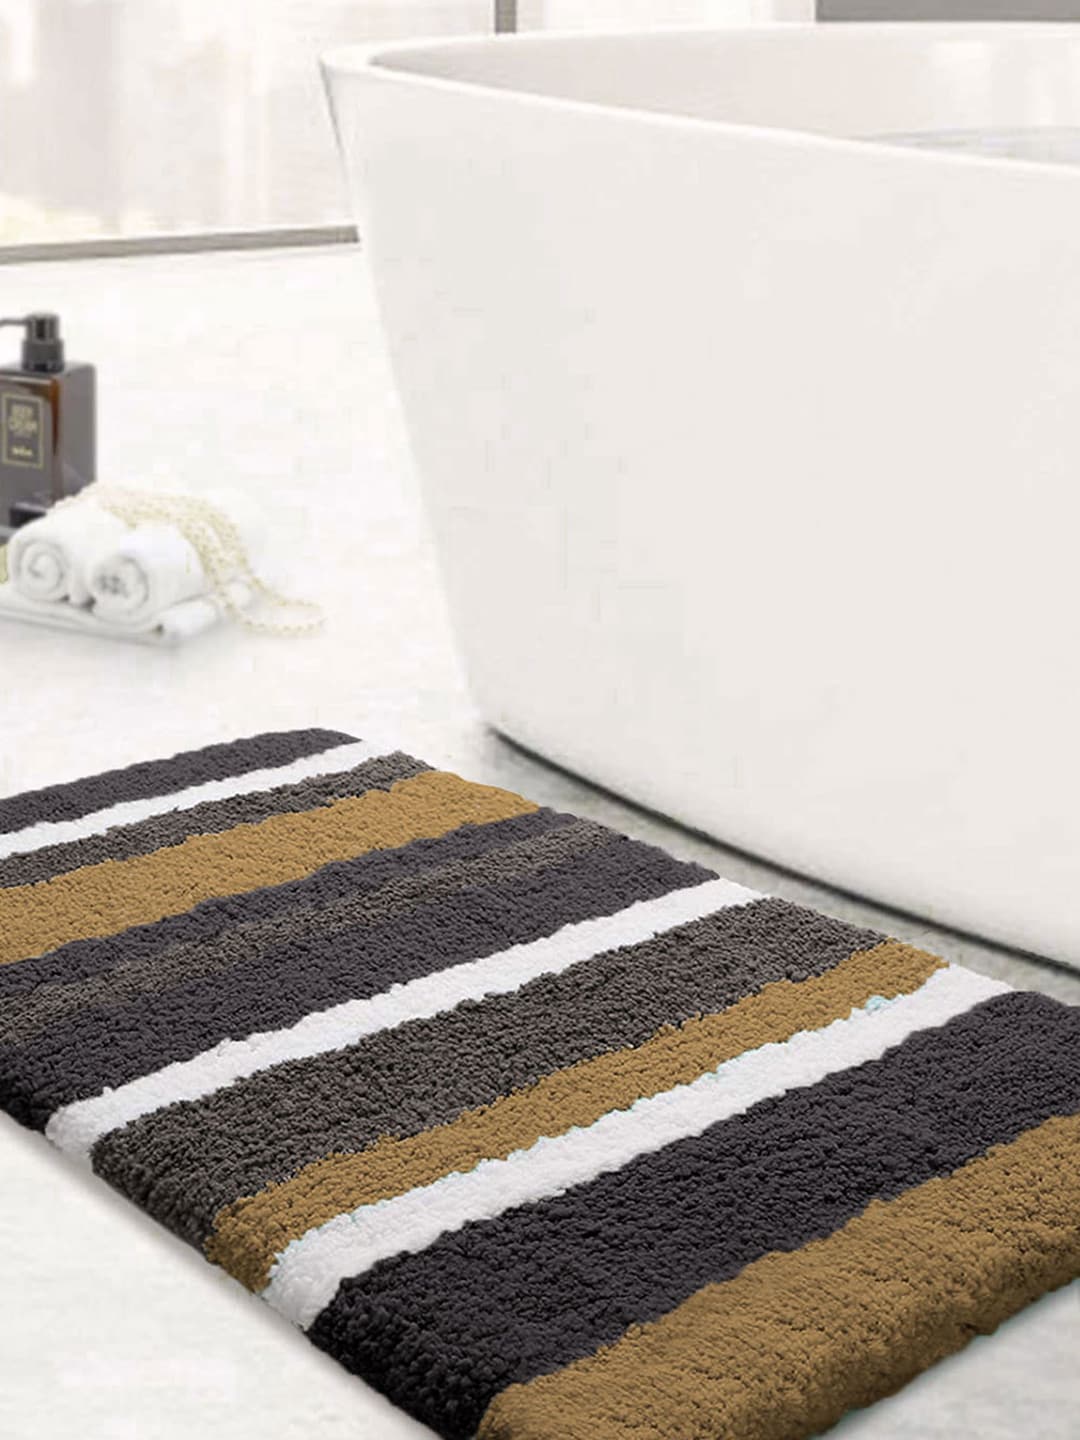 LUXEHOME INTERNATIONAL Gold-Toned Striped 2400 GSM Bath Rugs Price in India